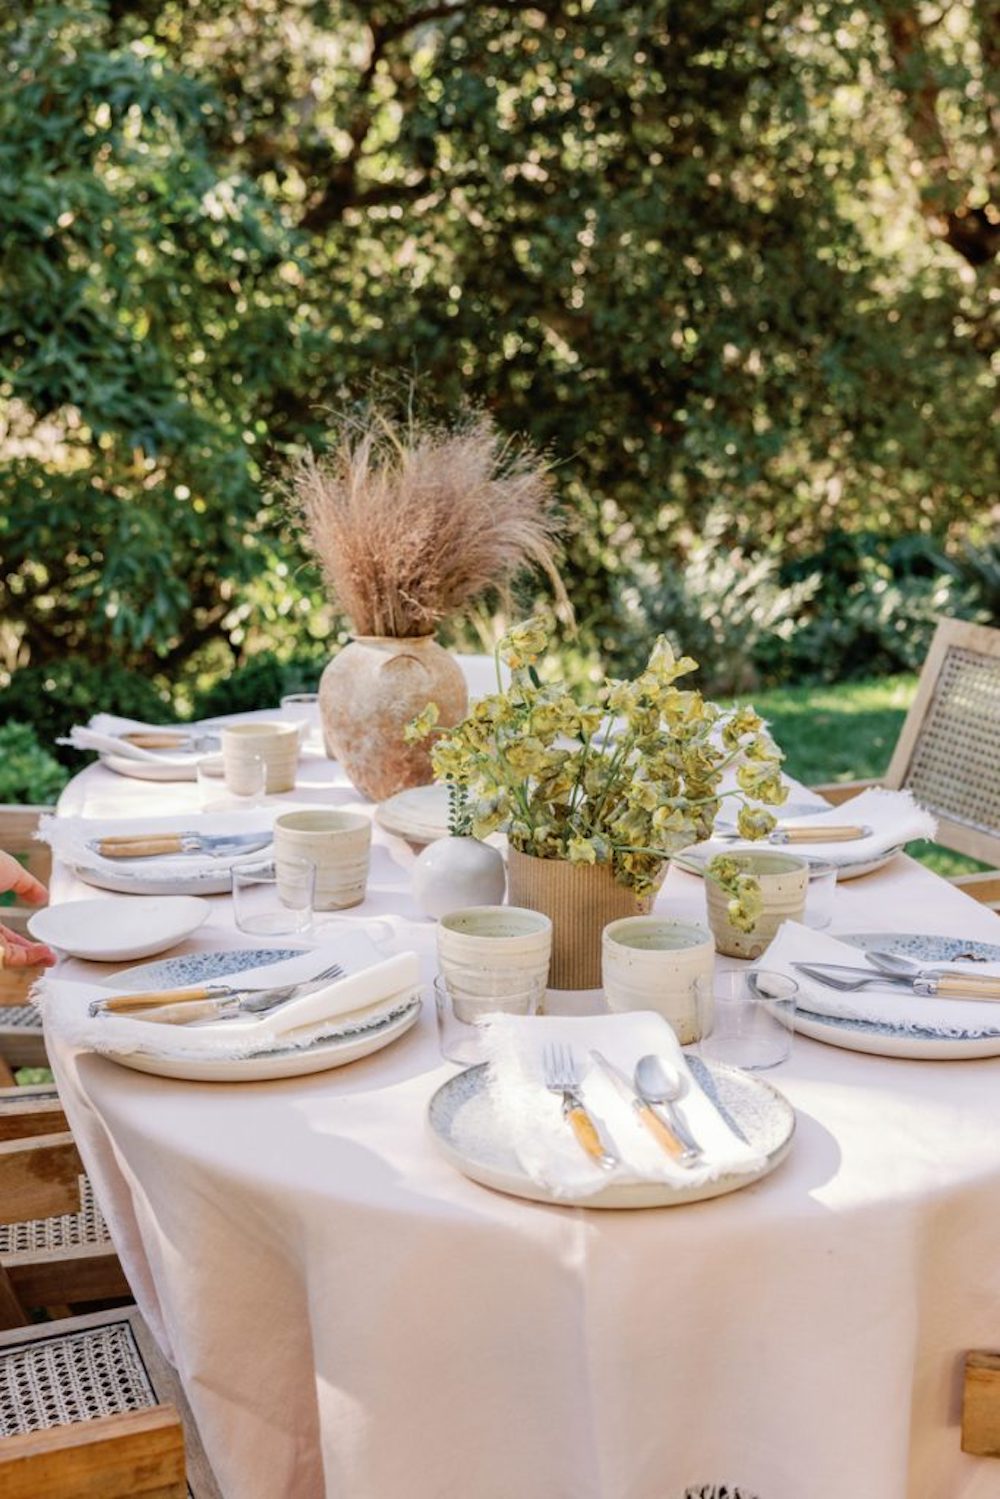 Natural outdoor table with light pink linen tablecloth, neutral dinnerware and flatware, and natural florals.